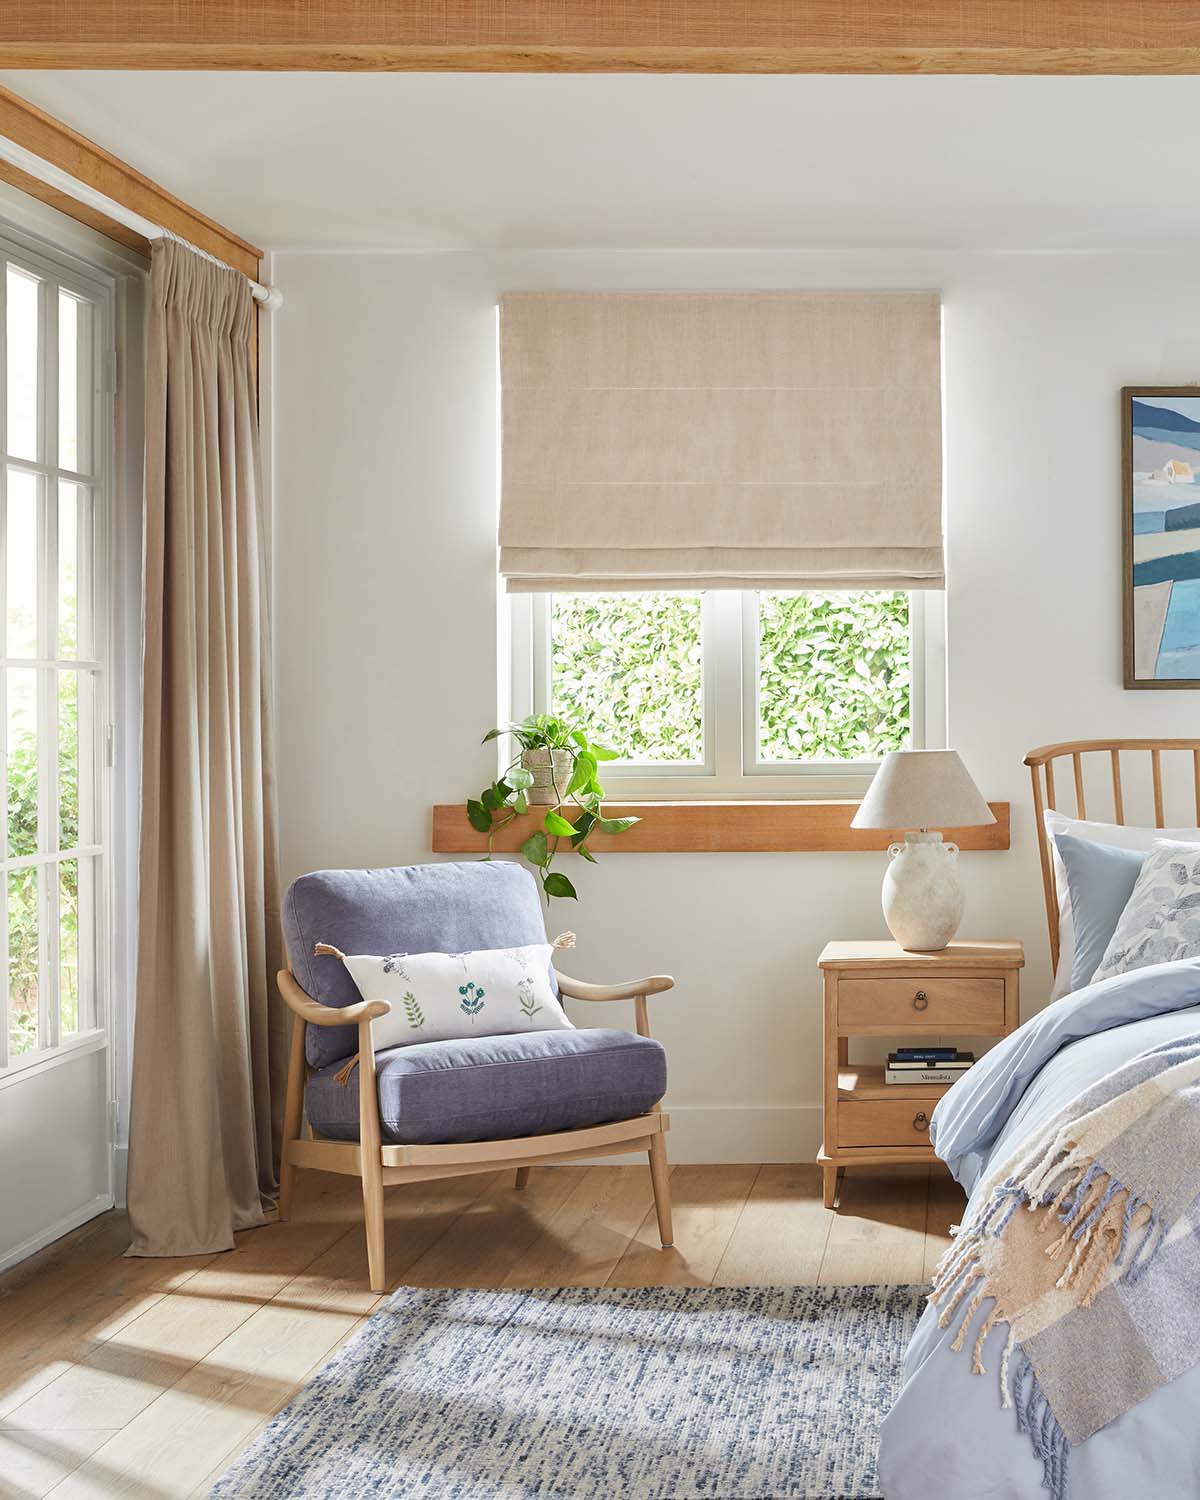 wooden chair in corner of light and bright bedroom with part of bed visible and blue rug